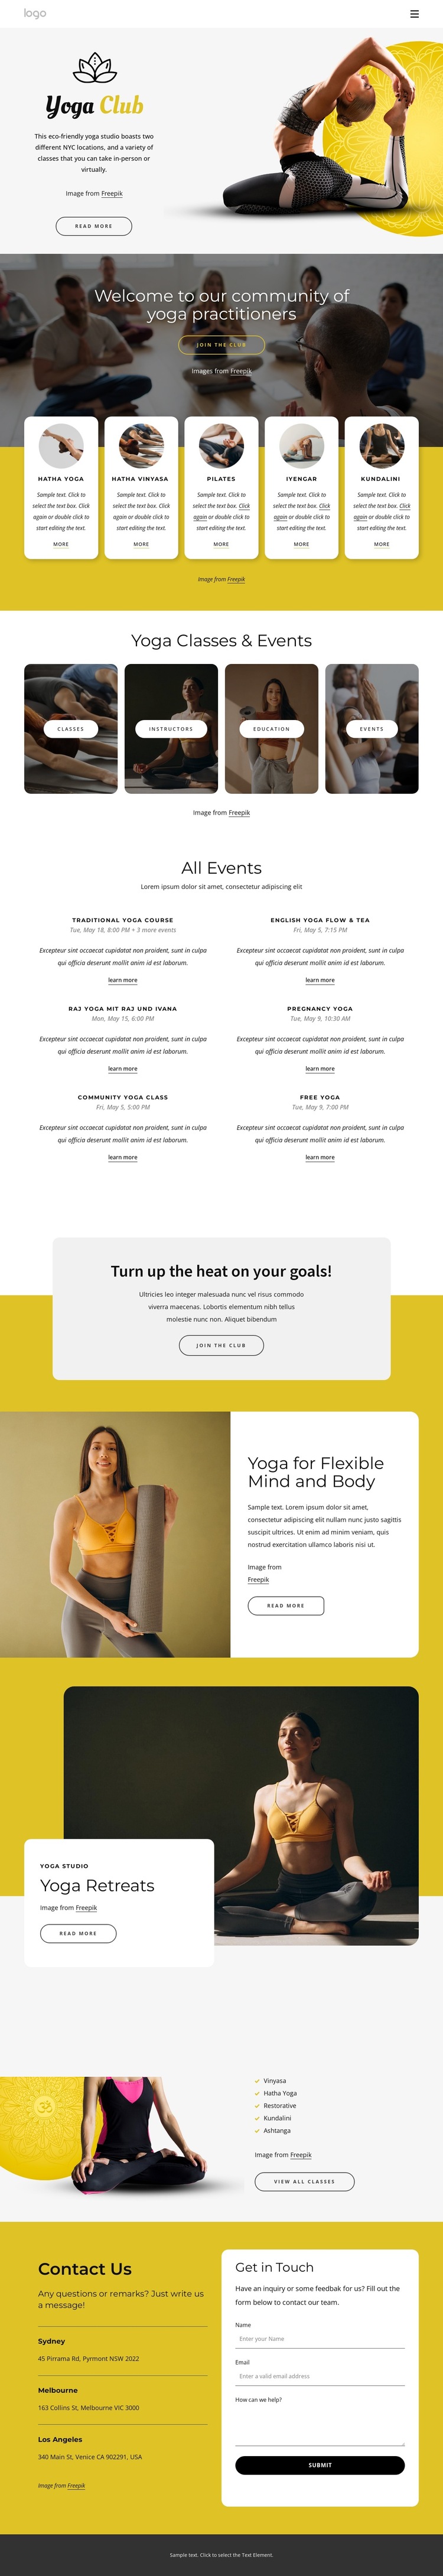 100 weekly in-studio classes HTML5 Template